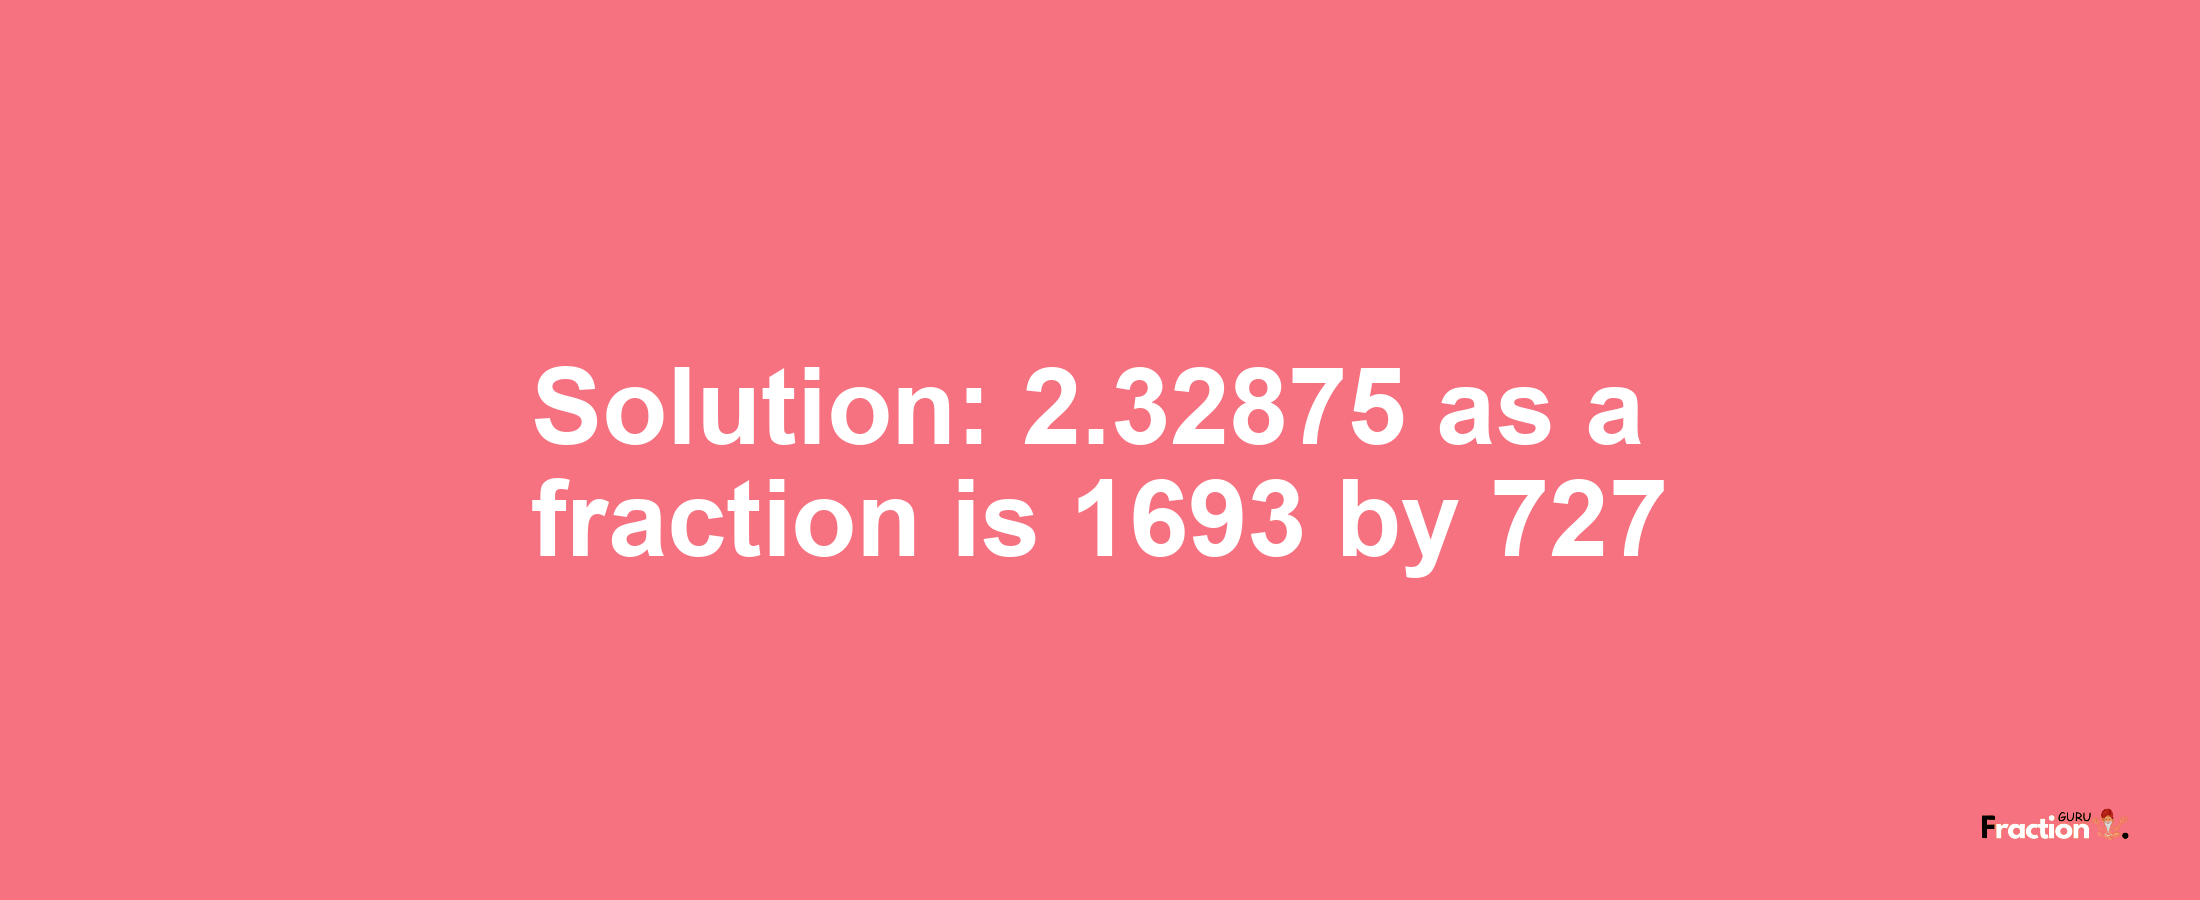 Solution:2.32875 as a fraction is 1693/727